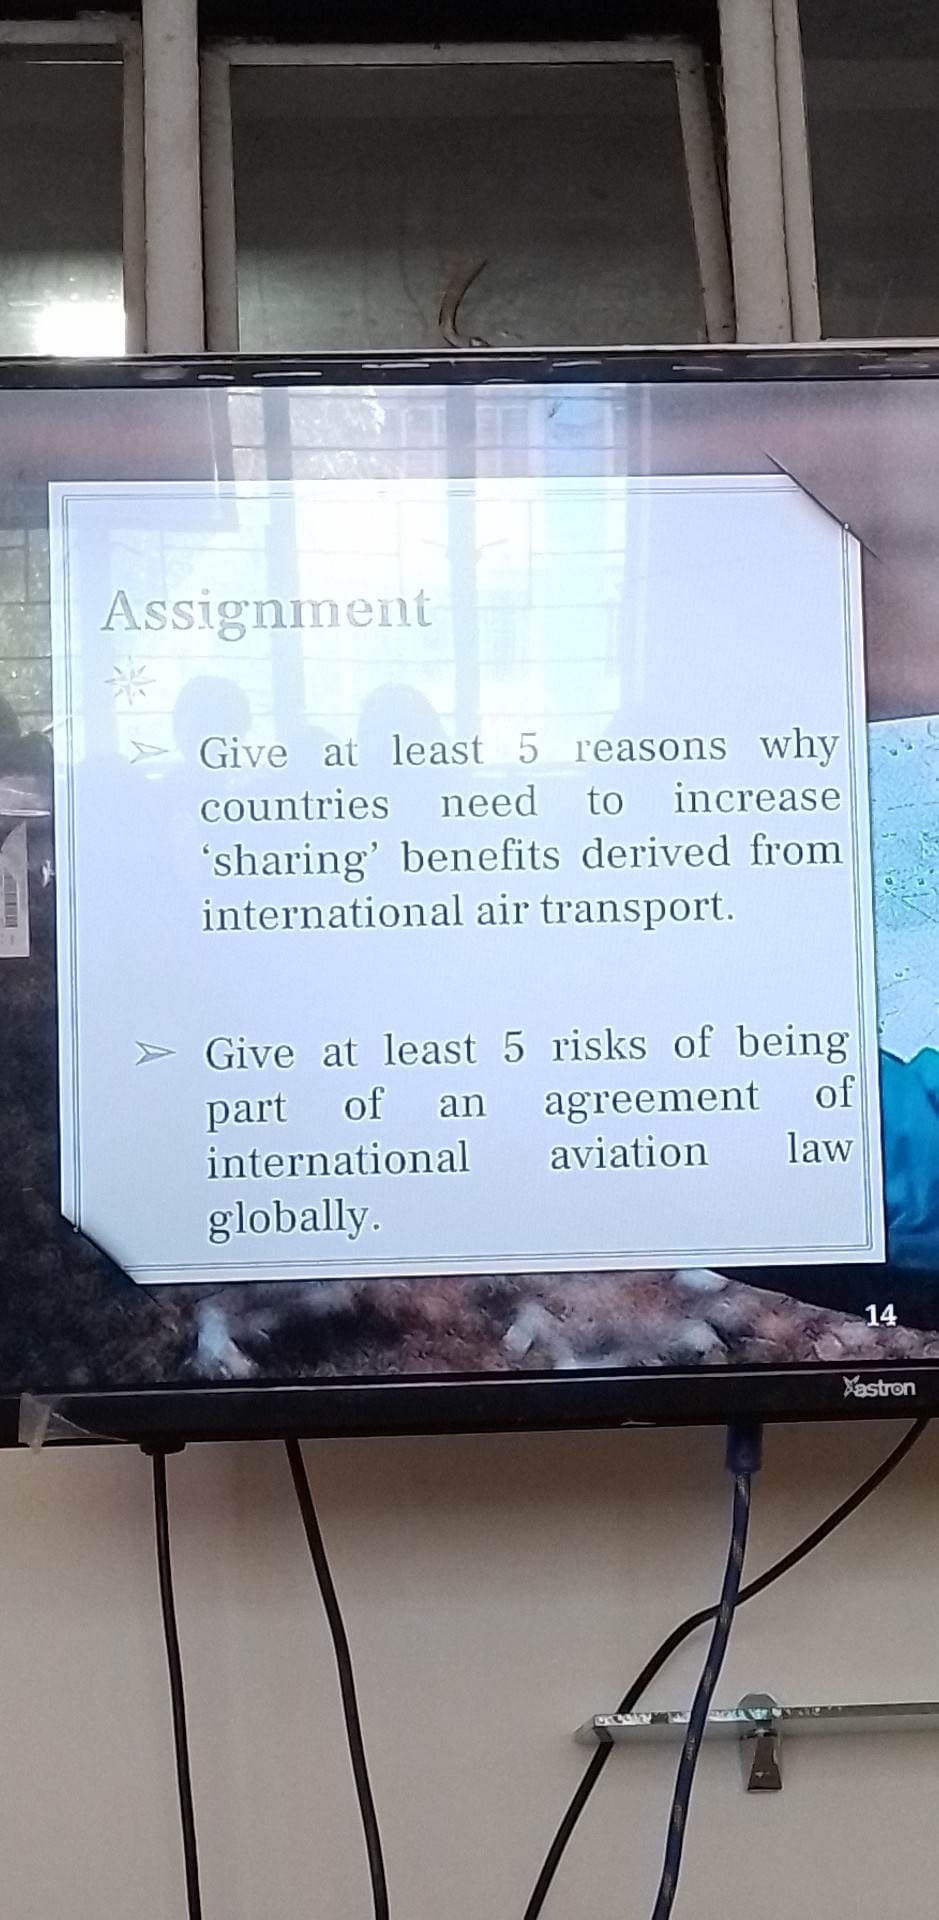 Assignment
Give at least 5 reasons why
countries need to increase
'sharing' benefits derived from
international air transport.
Give at least 5 risks of being
part of an agreement
international
aviation
globally.
of
law
14
Xastron